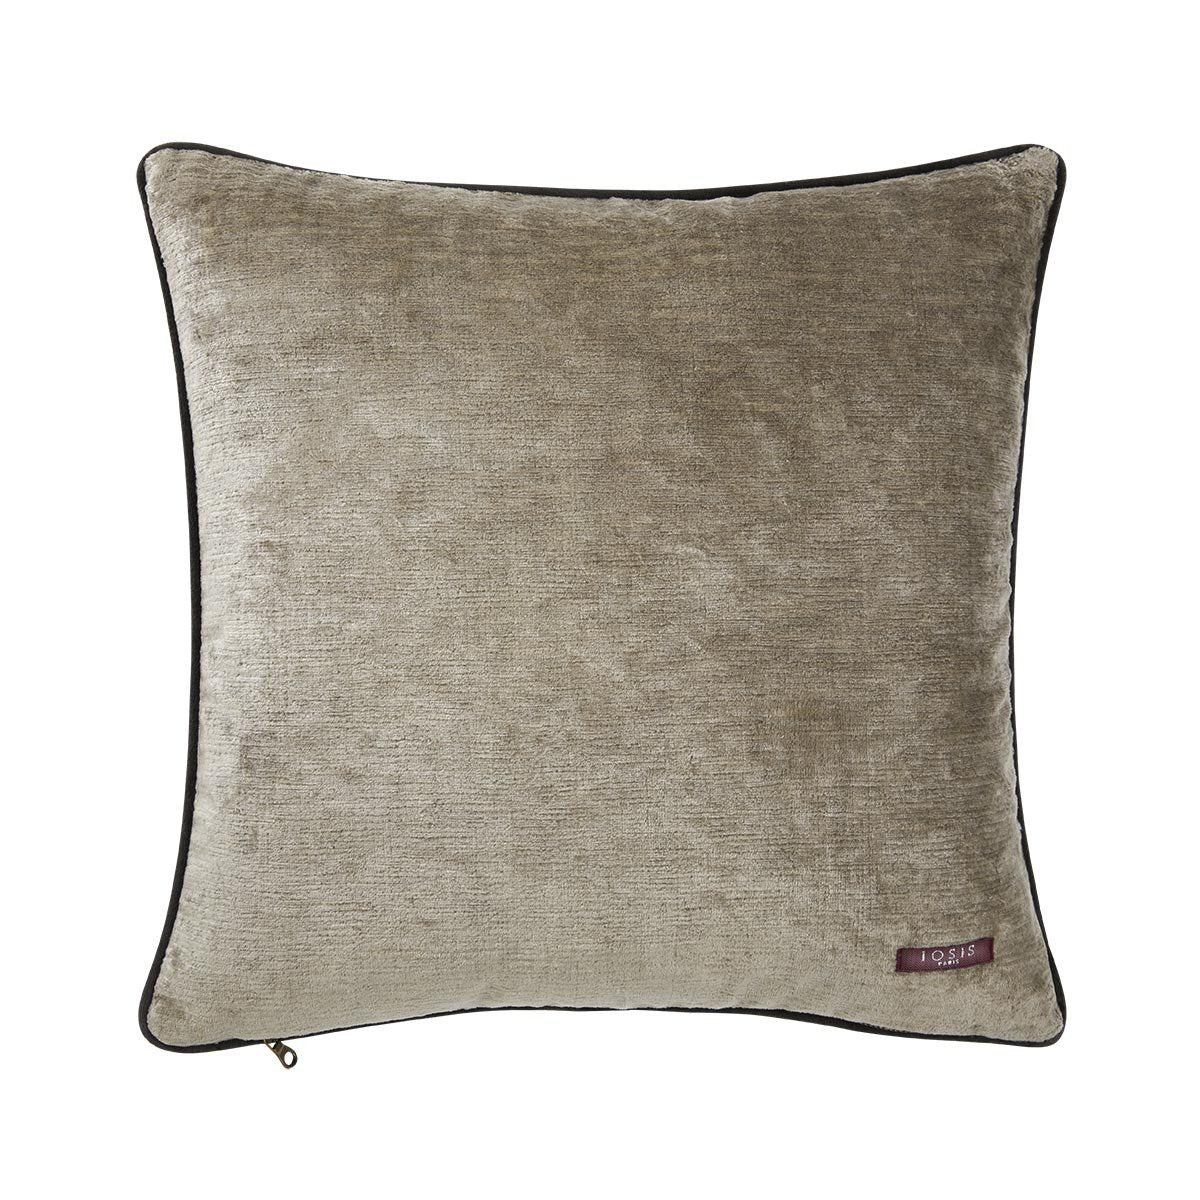 Fig Linens - Boromee Argent Decorative Pillow by Iosis - Back